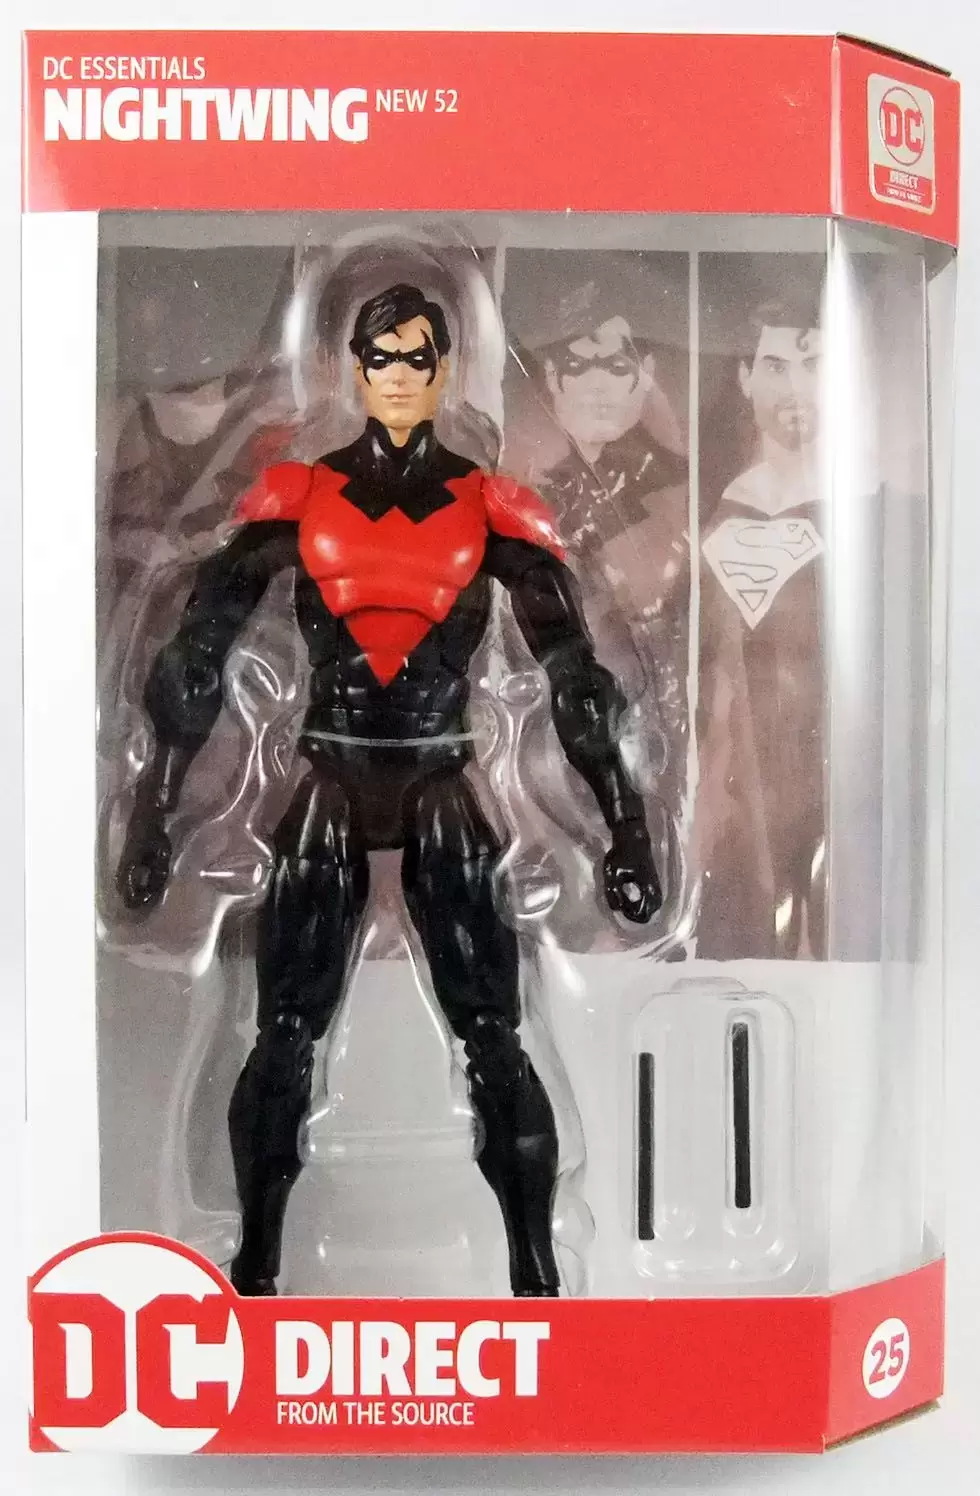 DC Essentials - DC Collectibles - Nightwing New 52